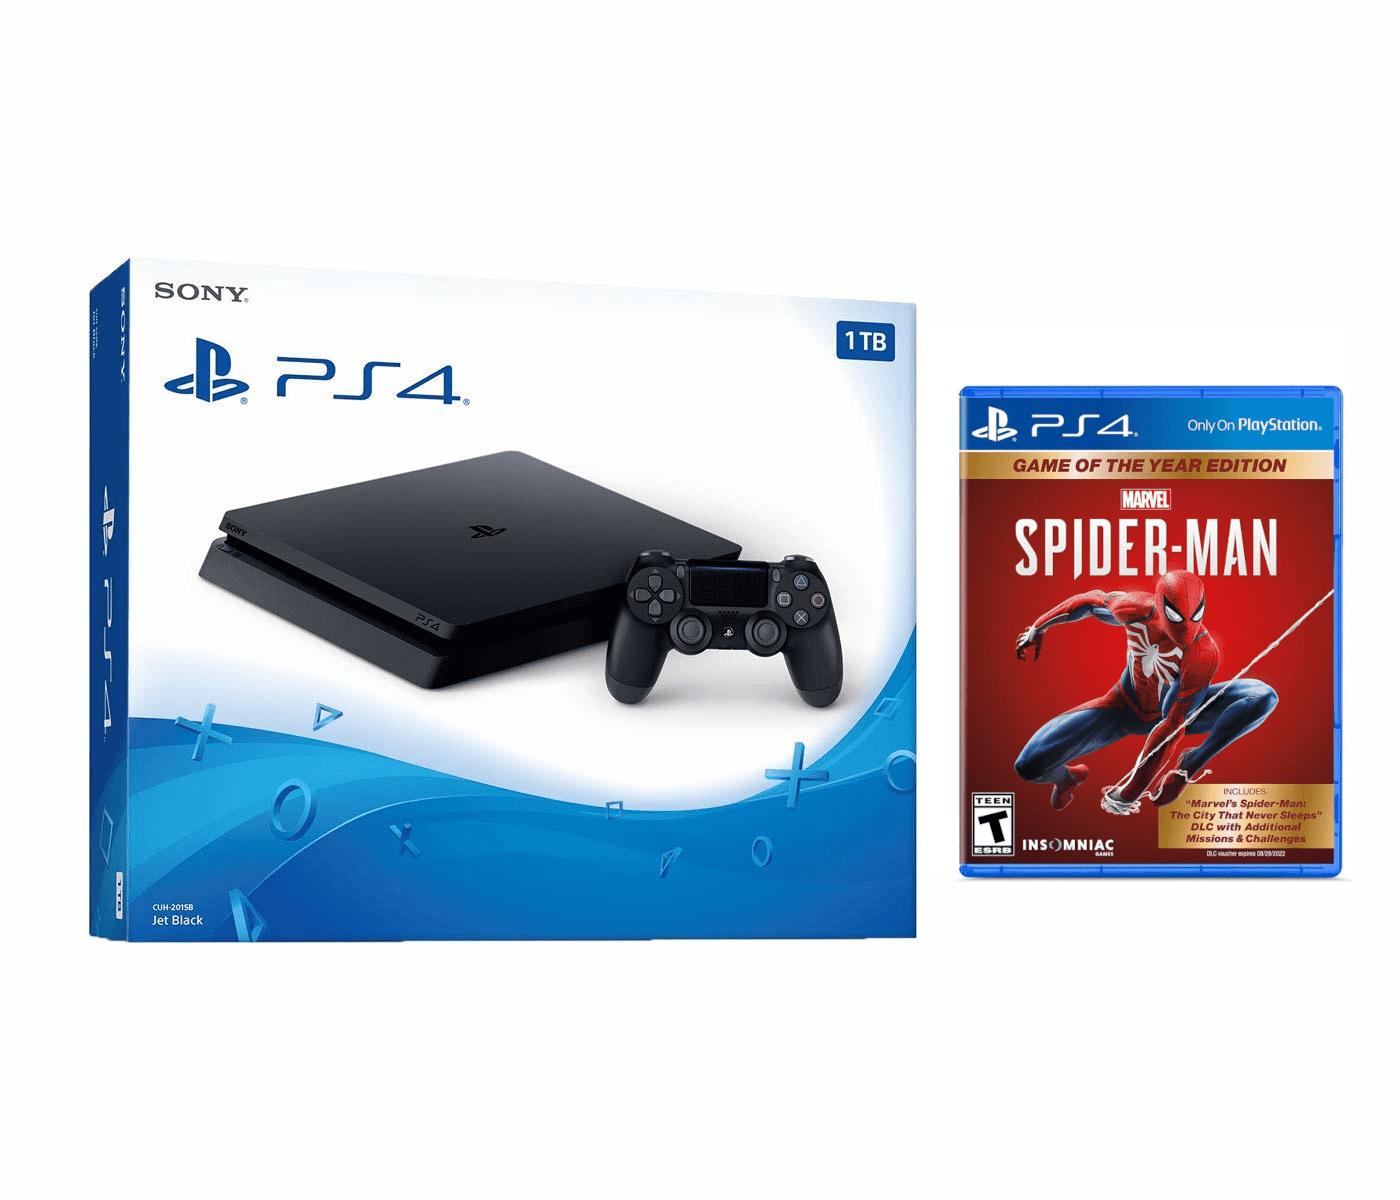 PlayStation 4 Pro 1TB Limited Edition Console - Marvel's Spider-Man Bundle  [Discontinued]